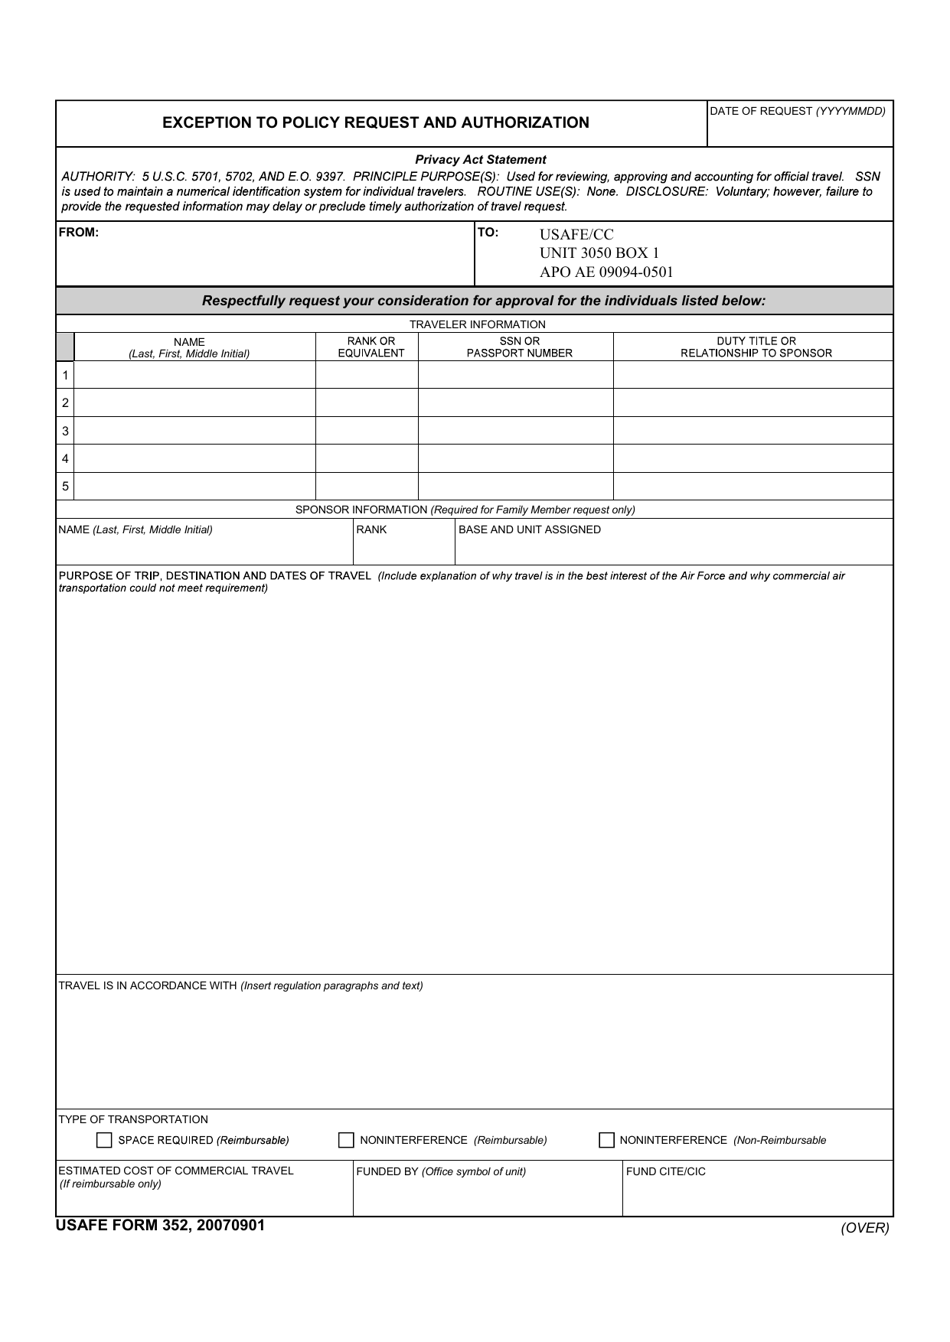 USAFE Form 352 Exception to Policy Request and Authorization, Page 1